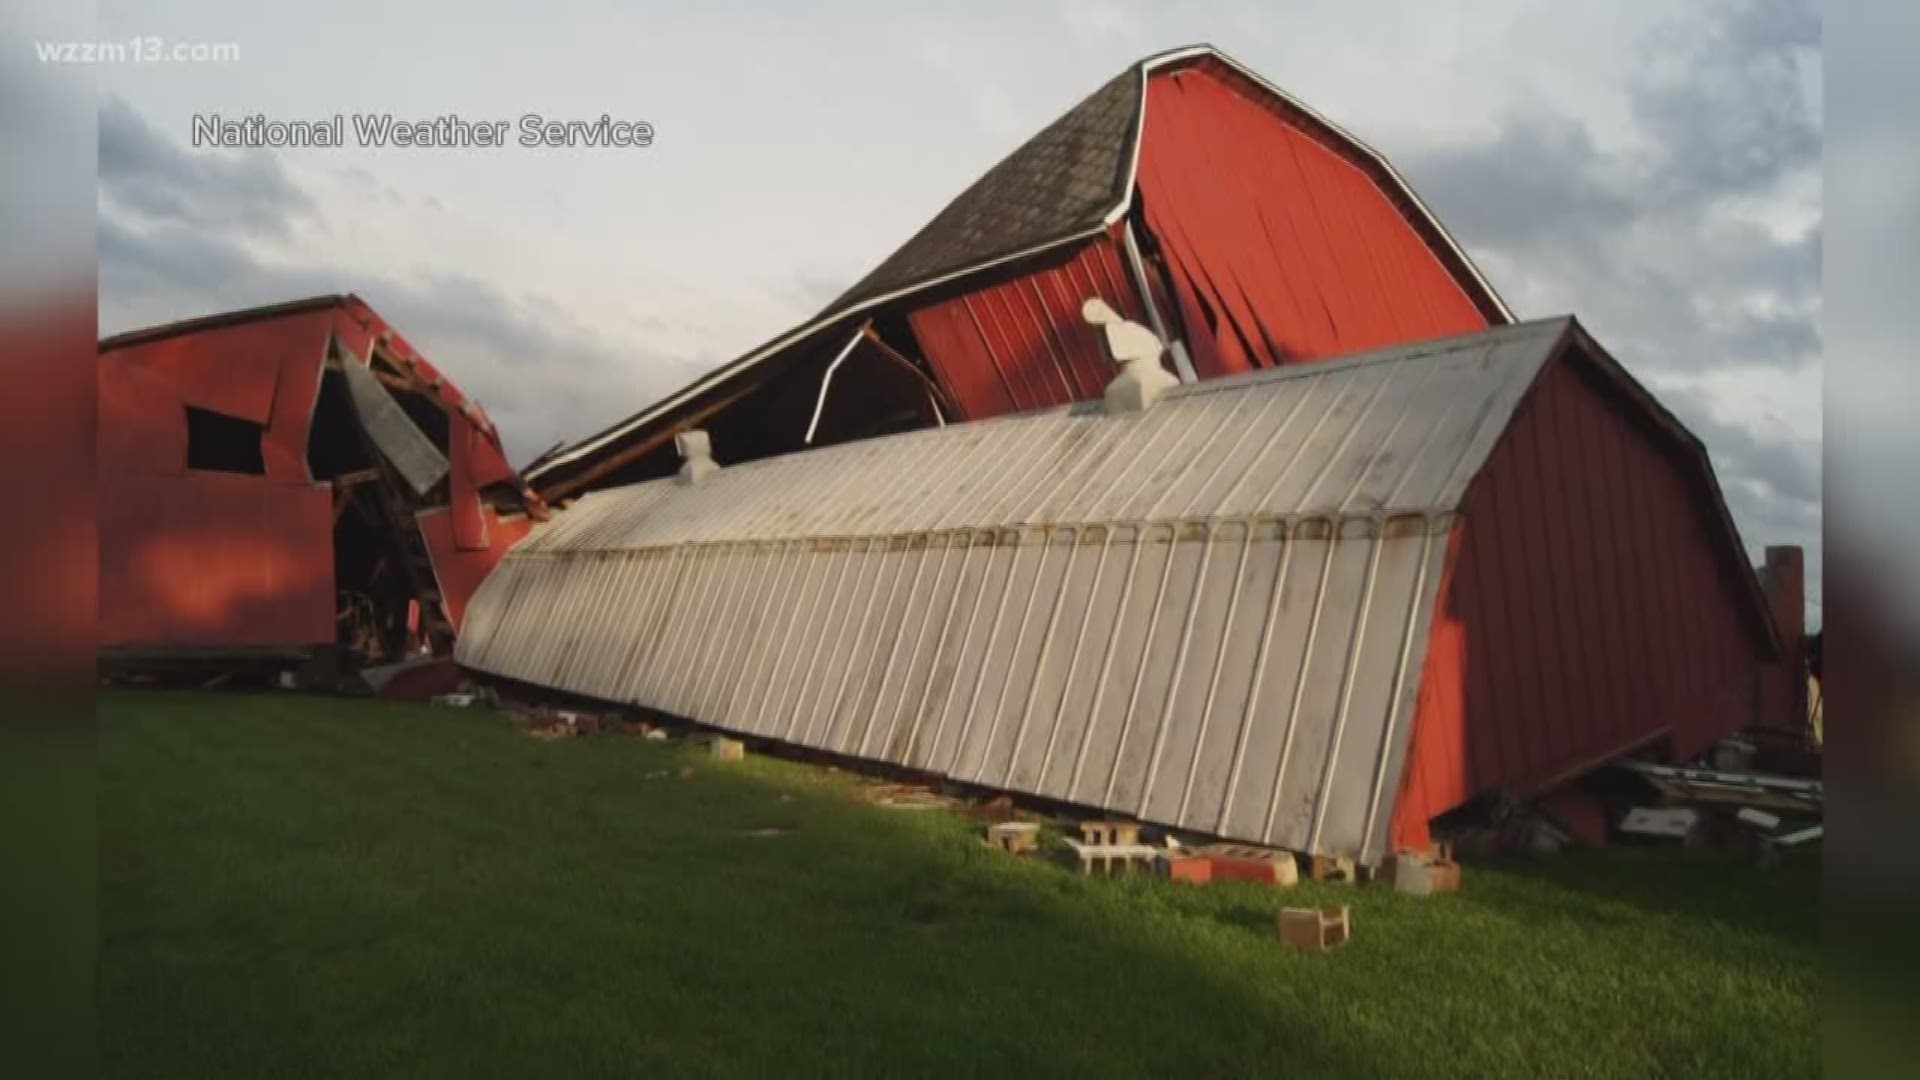 A tornado was confirmed by the National Weather Service in Barry County Sunday, but that was after the tornado warning lasted a brief nine minutes. There were three barns on a farm damaged as well as a telephone pole and several downed trees.